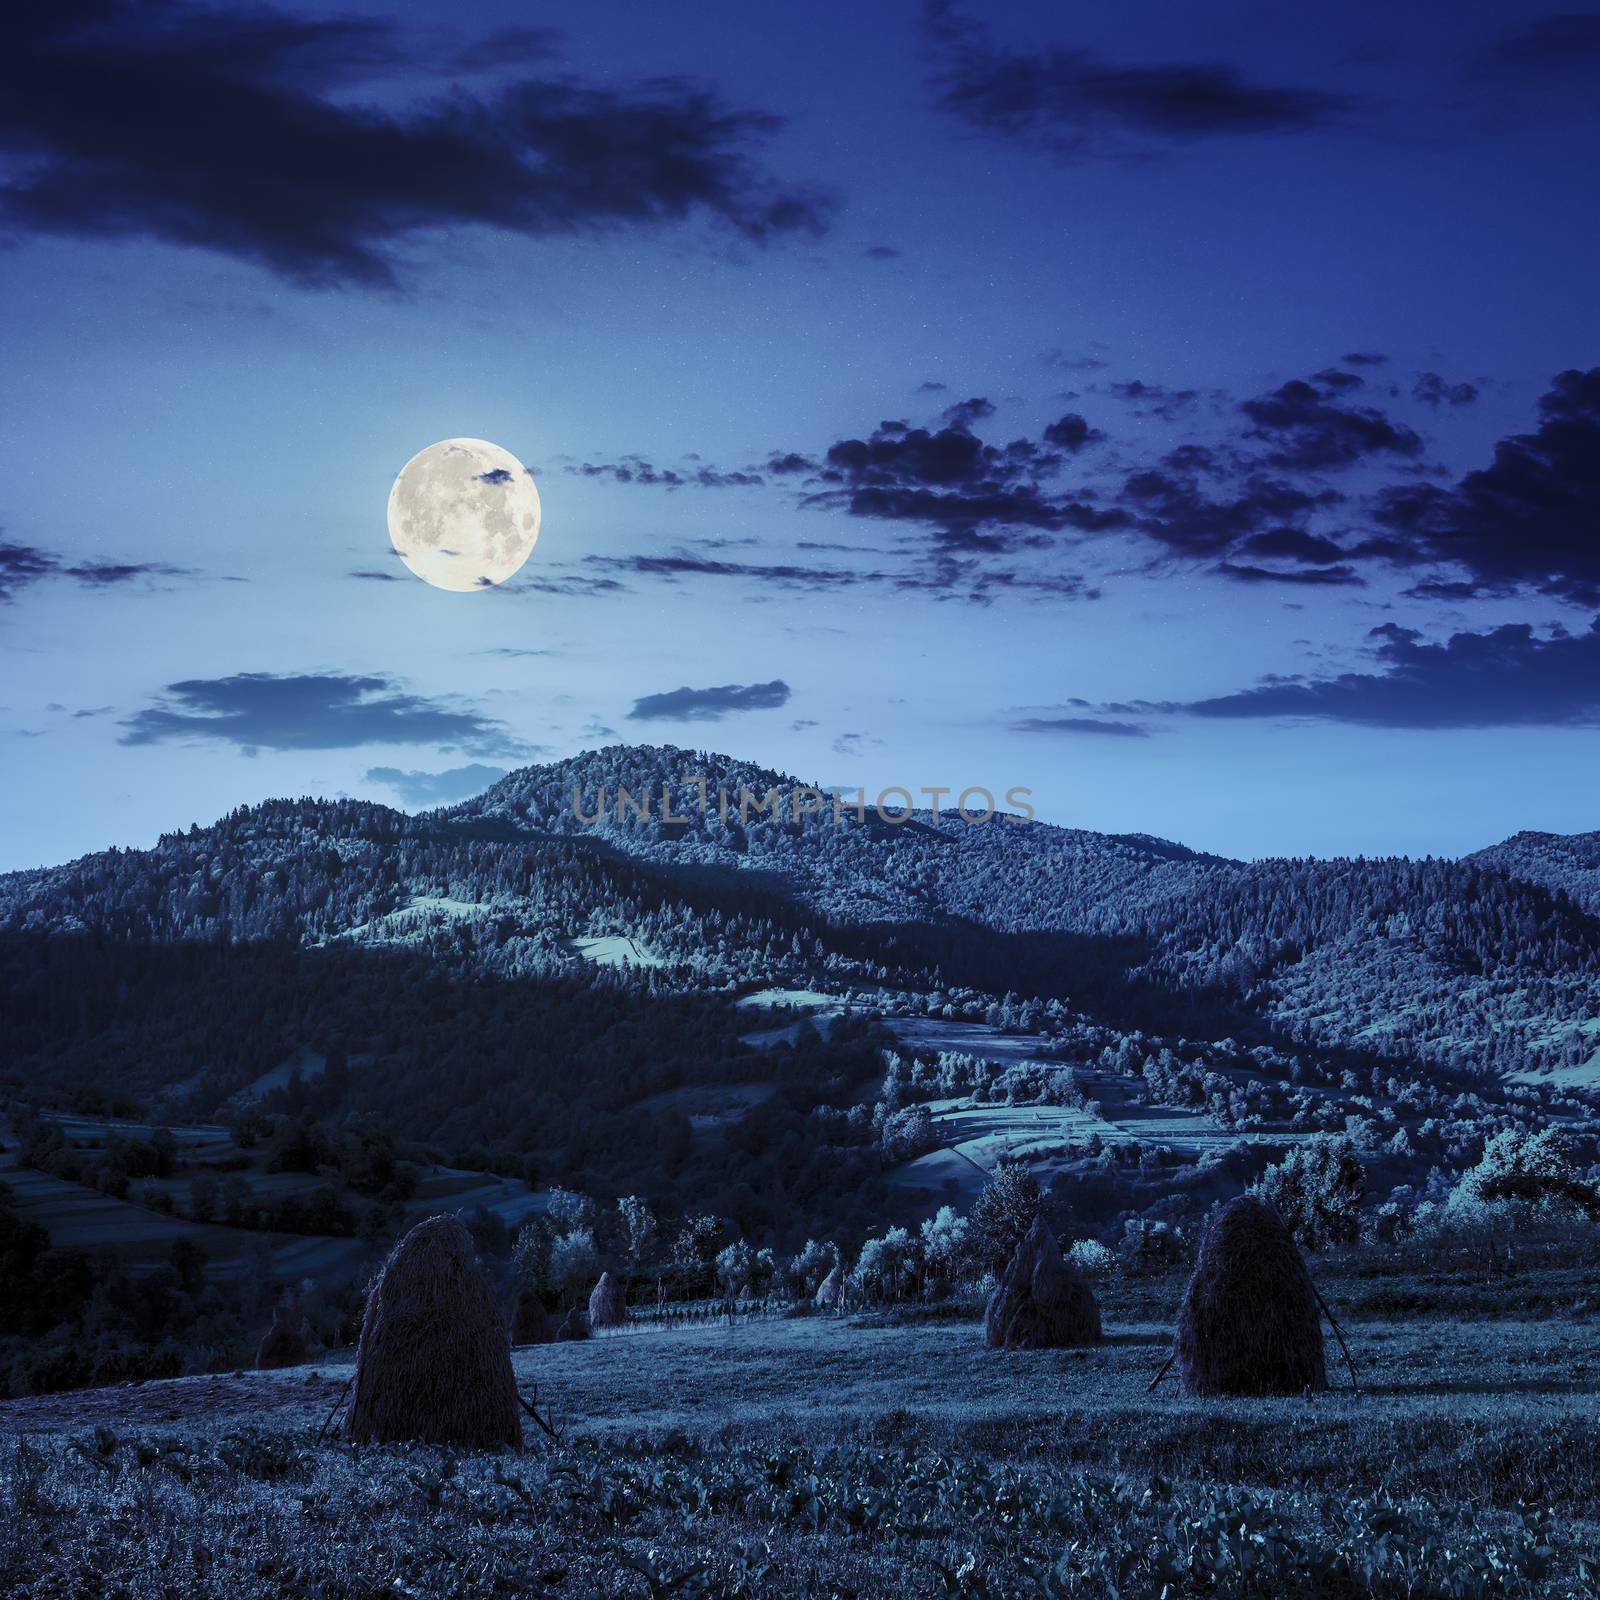 field with haystack on hillside at night by Pellinni